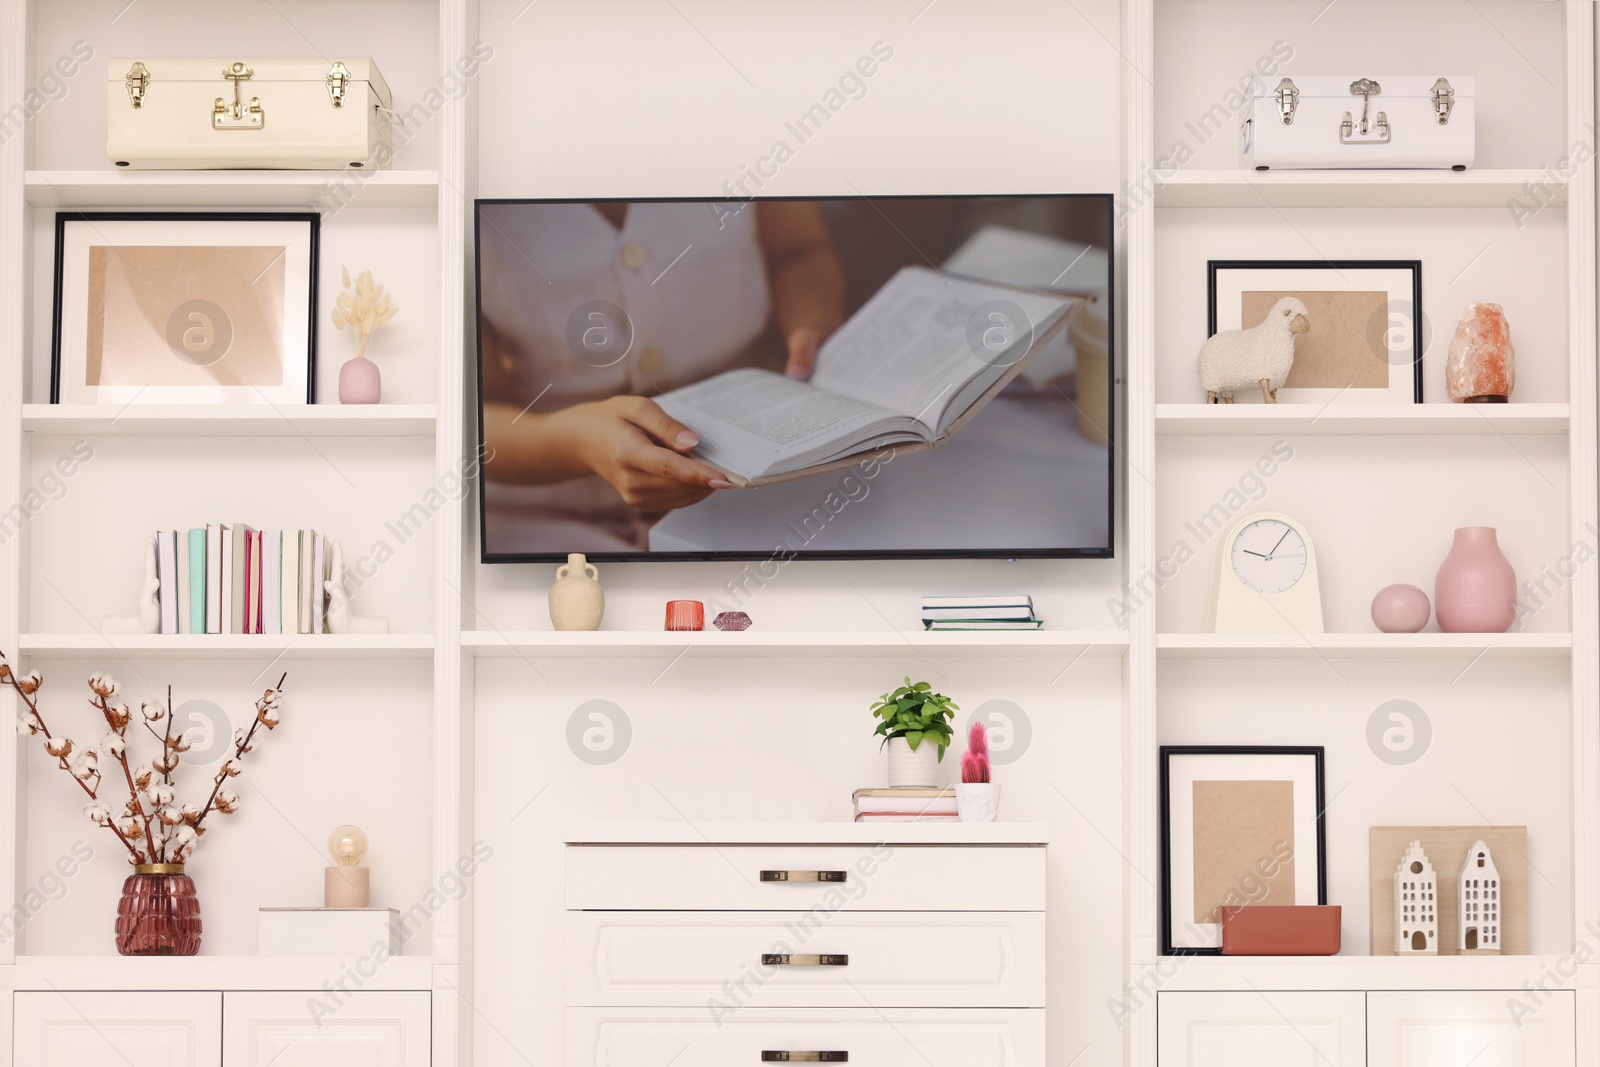 Photo of TV and shelves with different decor in room. Interior design